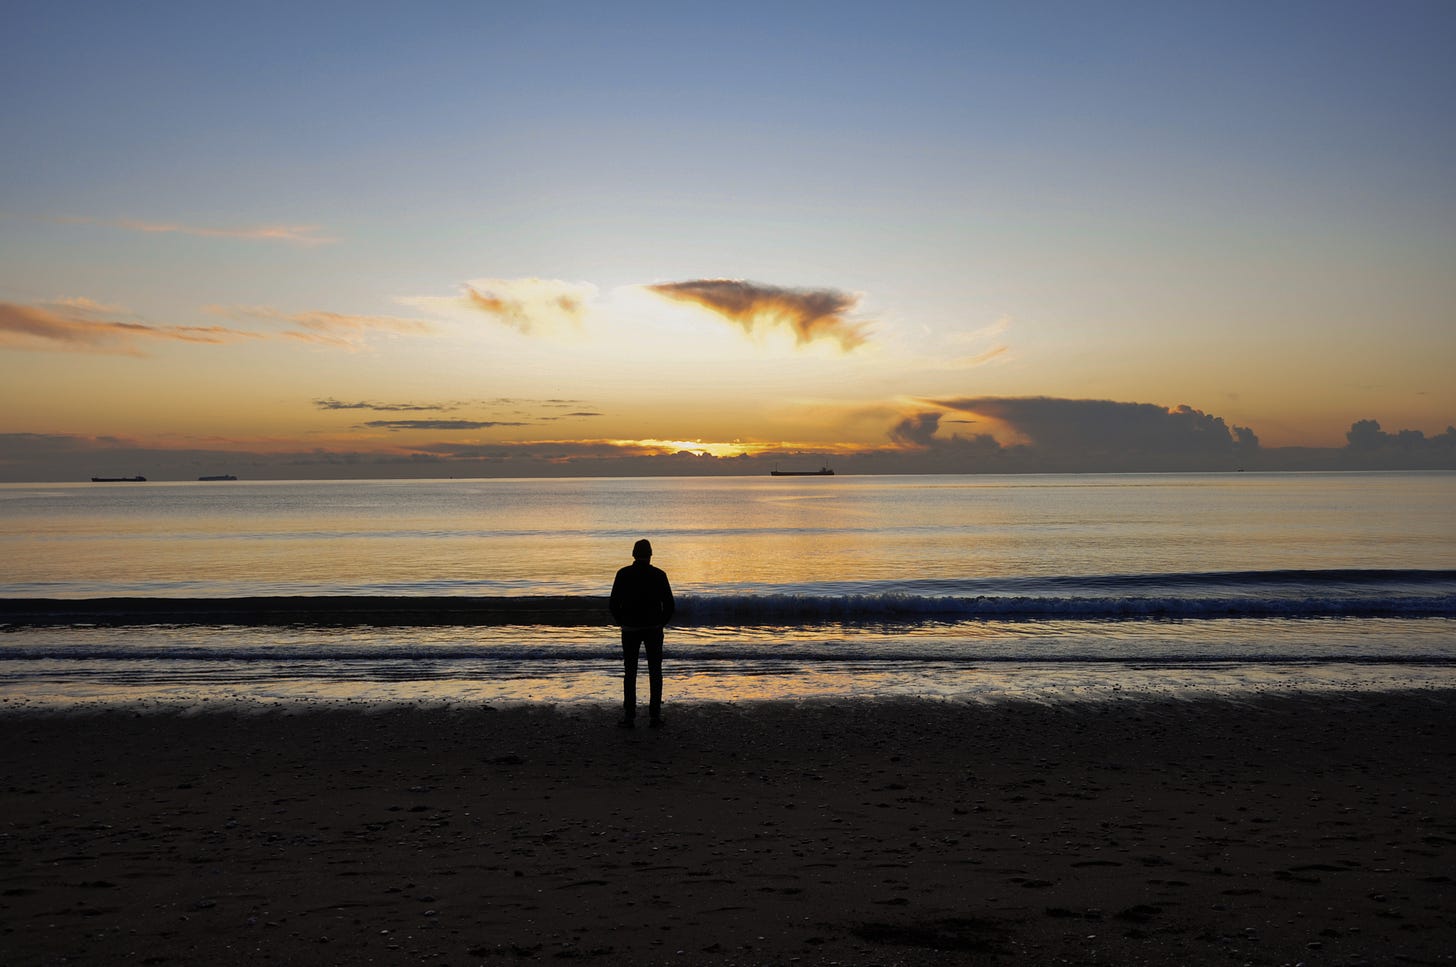 A silhouette of a man looking out across the water, where the sun is just beginning to rise. The sky has a faint tinge of yellow.